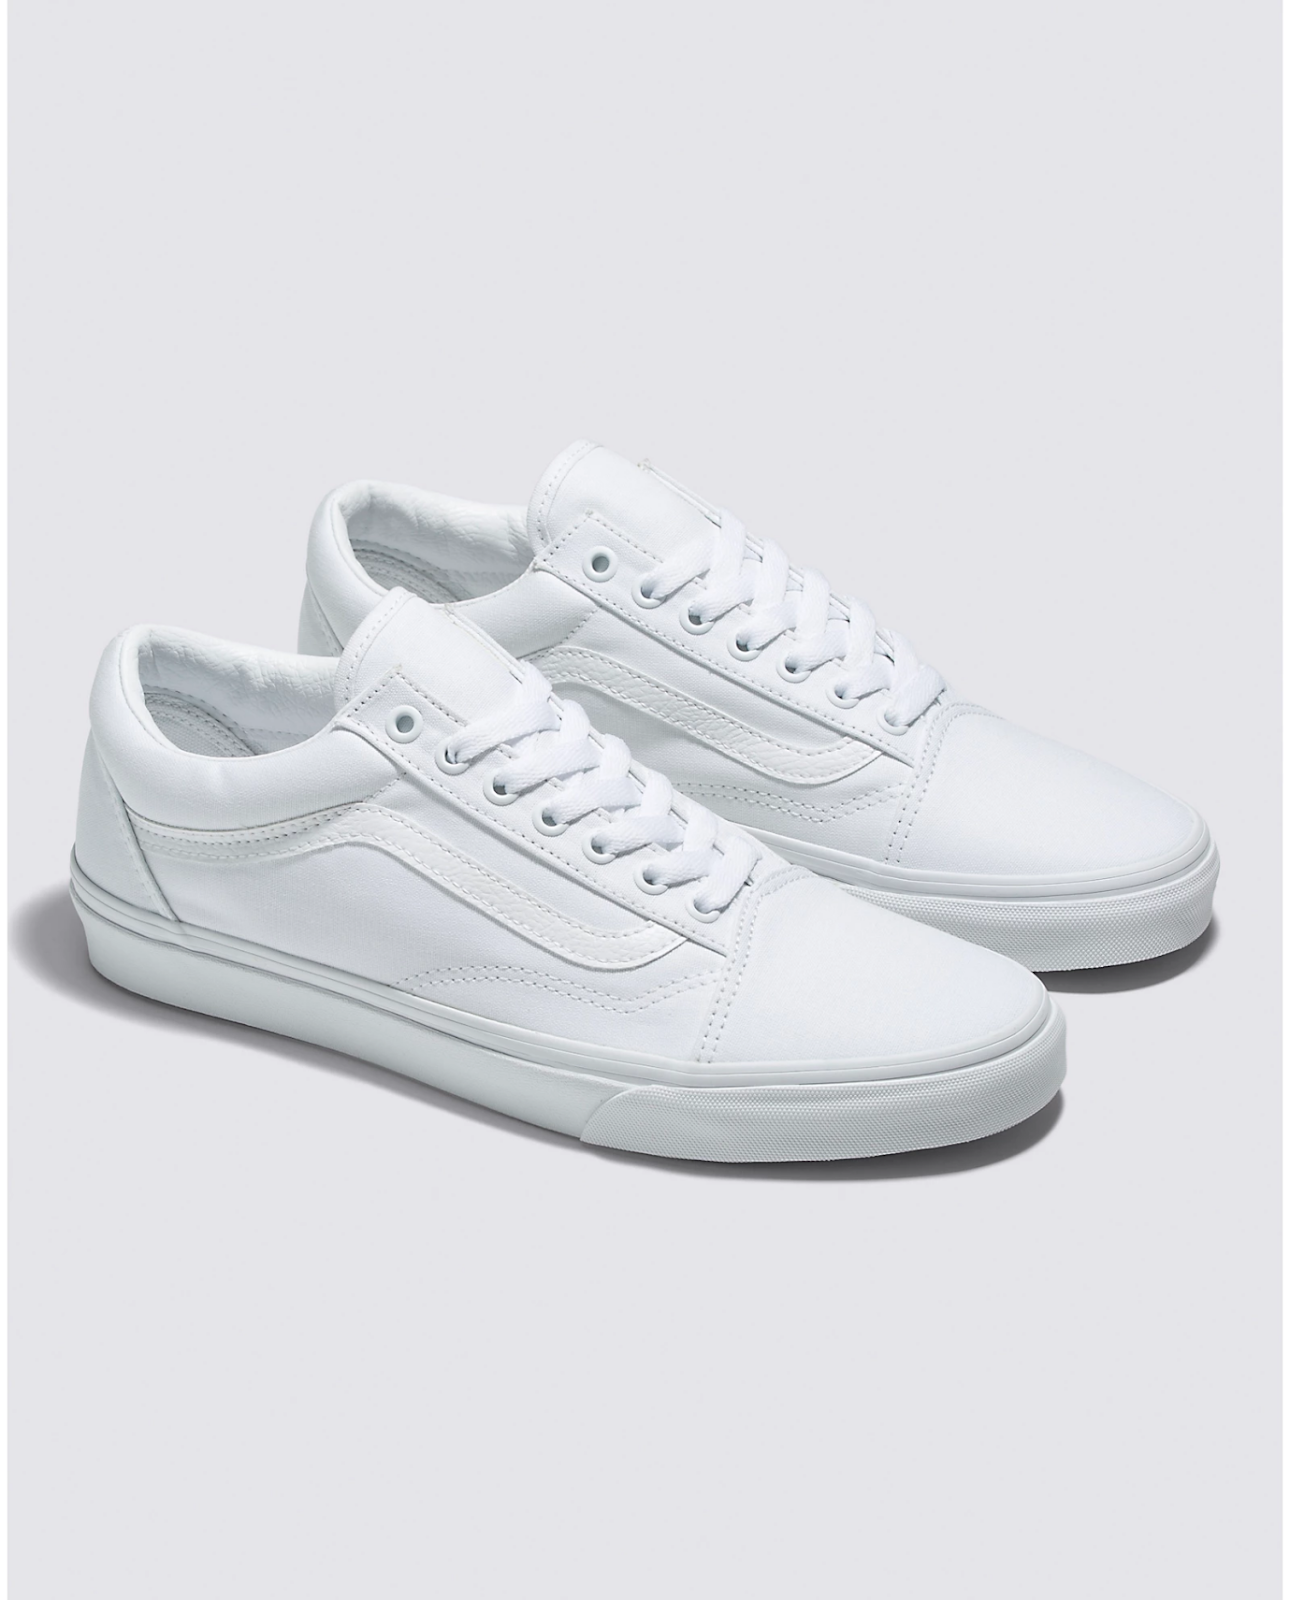 General: White canvas Vans sneakers.
Specific model: White Vans Old Skool sneakers.
Action: A person wearing white Vans sneakers.
Style: Classic white sneakers for a casual look.
Brand: White Vans, a popular brand of casual sneakers.